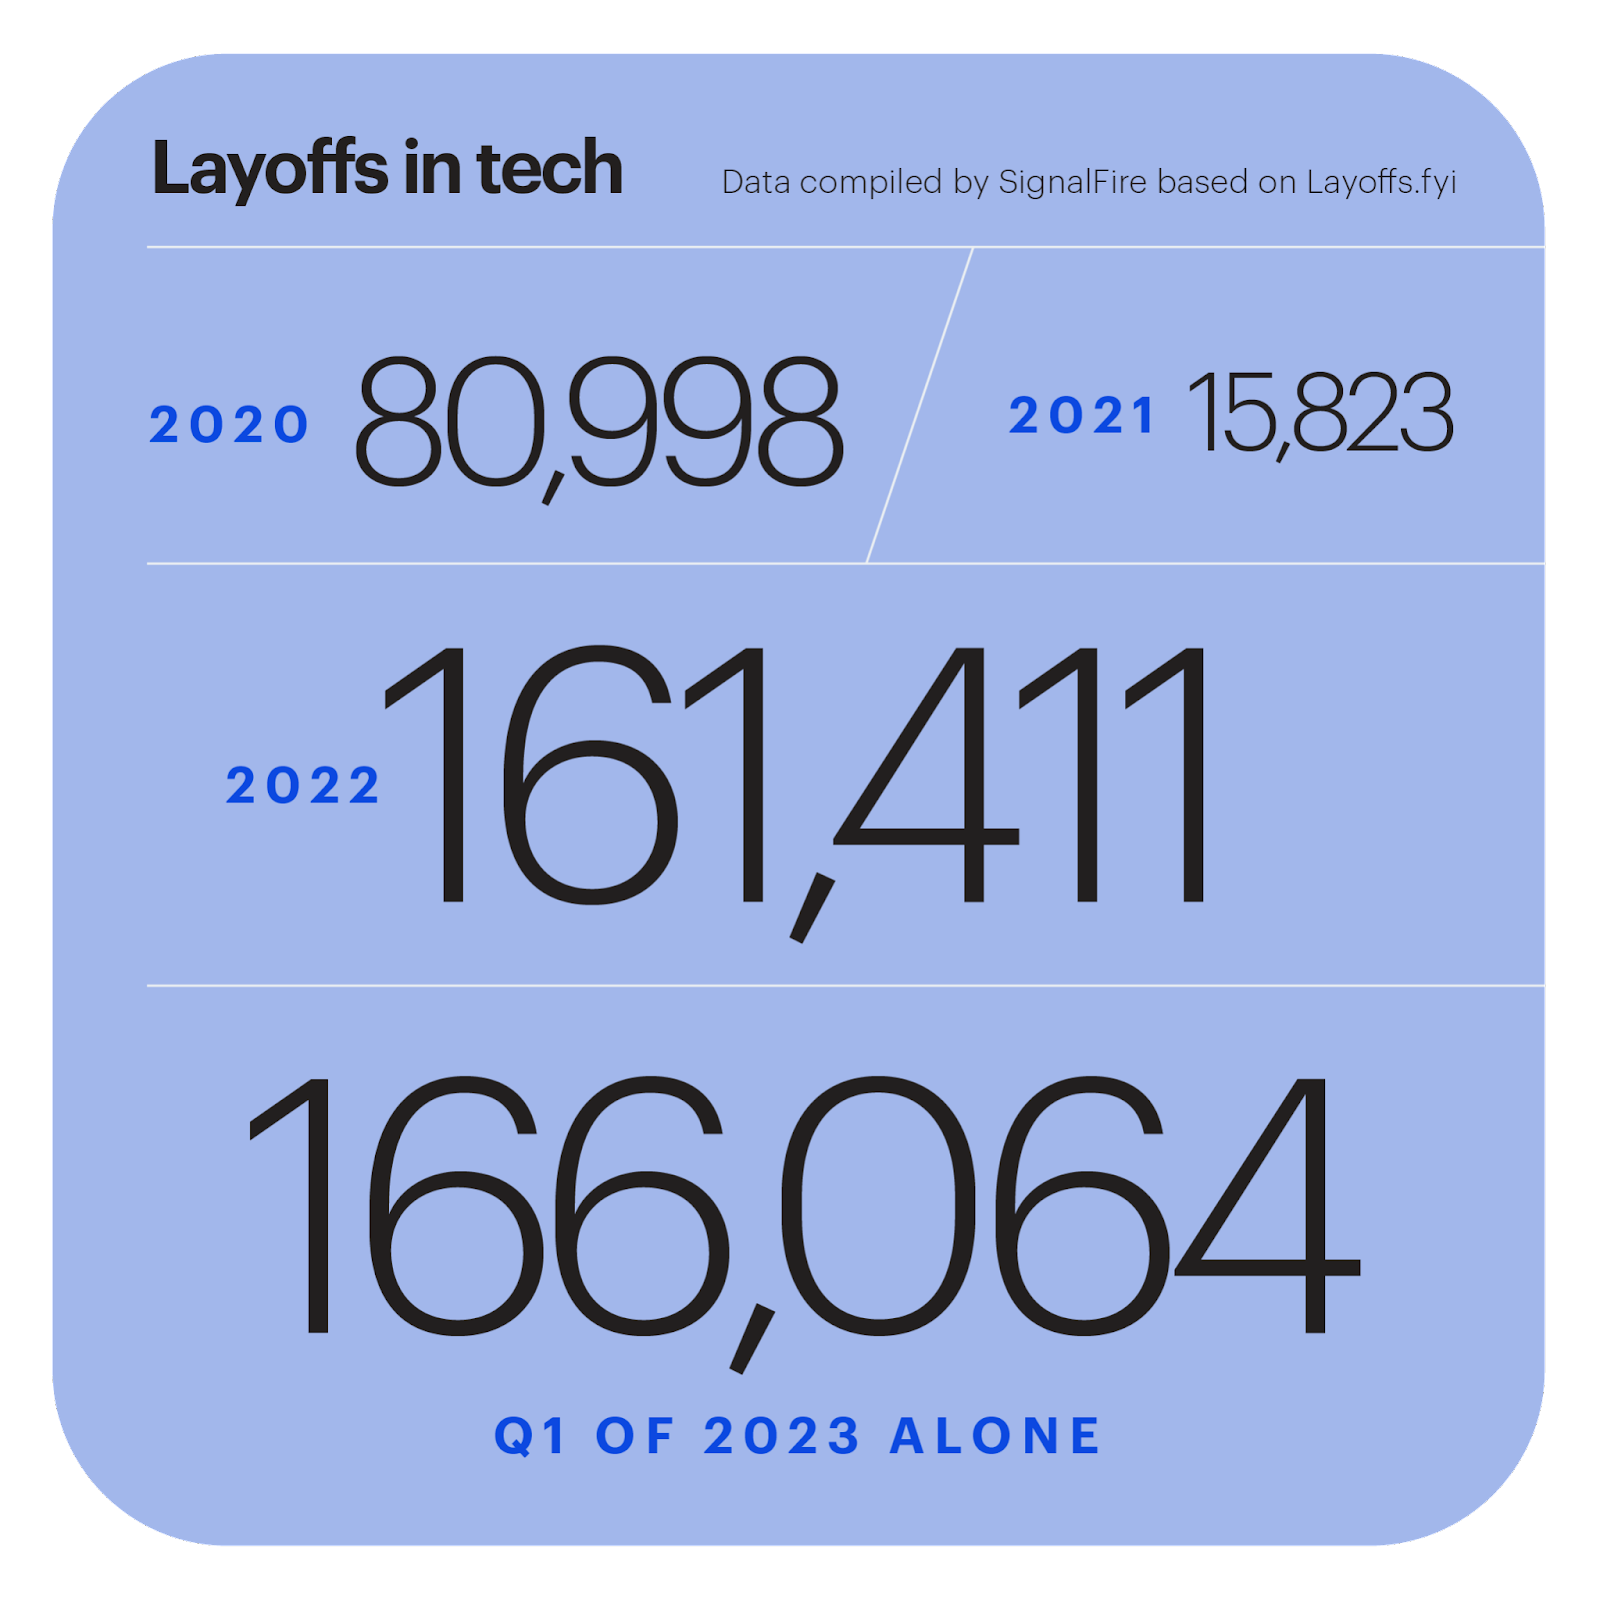 Tech industry layoffs - SignalFire according to data compiled by Layoffs.fyi